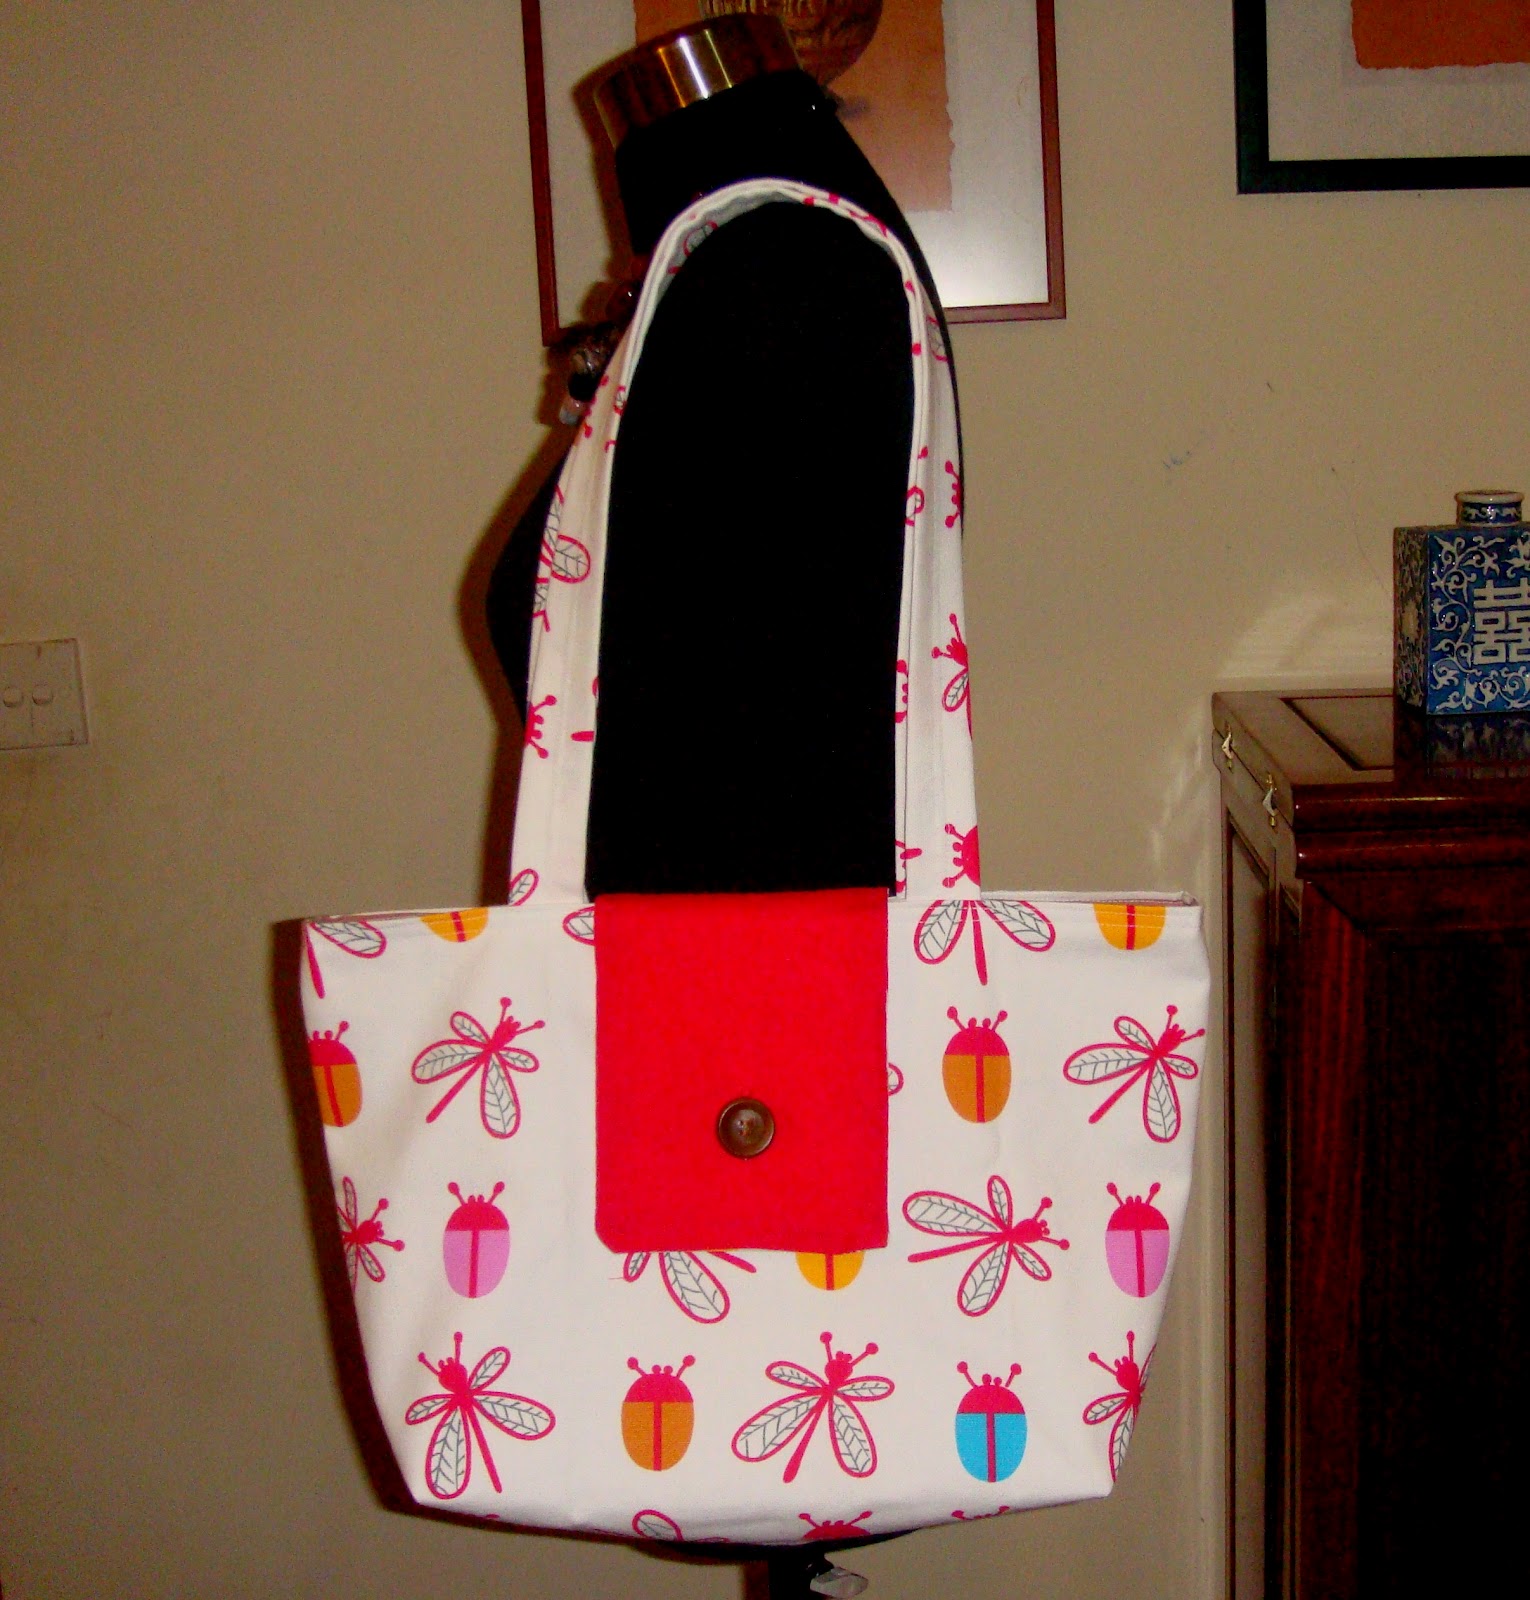 How to make your own tote bag